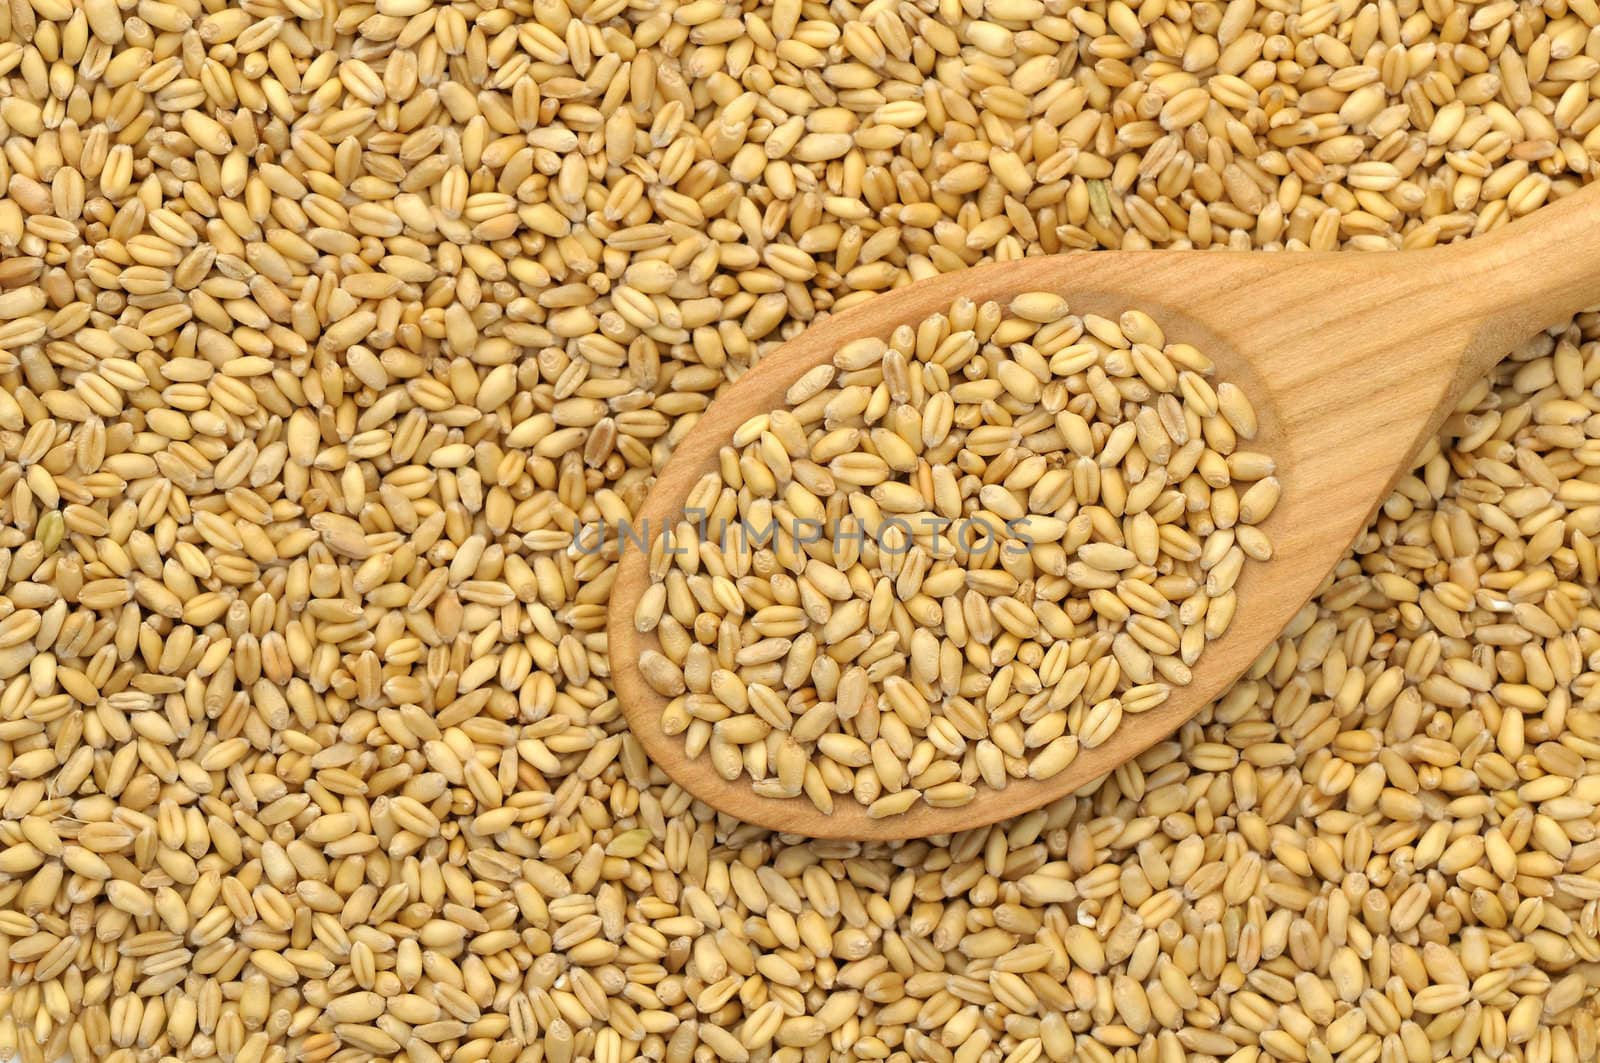 Textured soft wheat seeds background with a wooden spoon